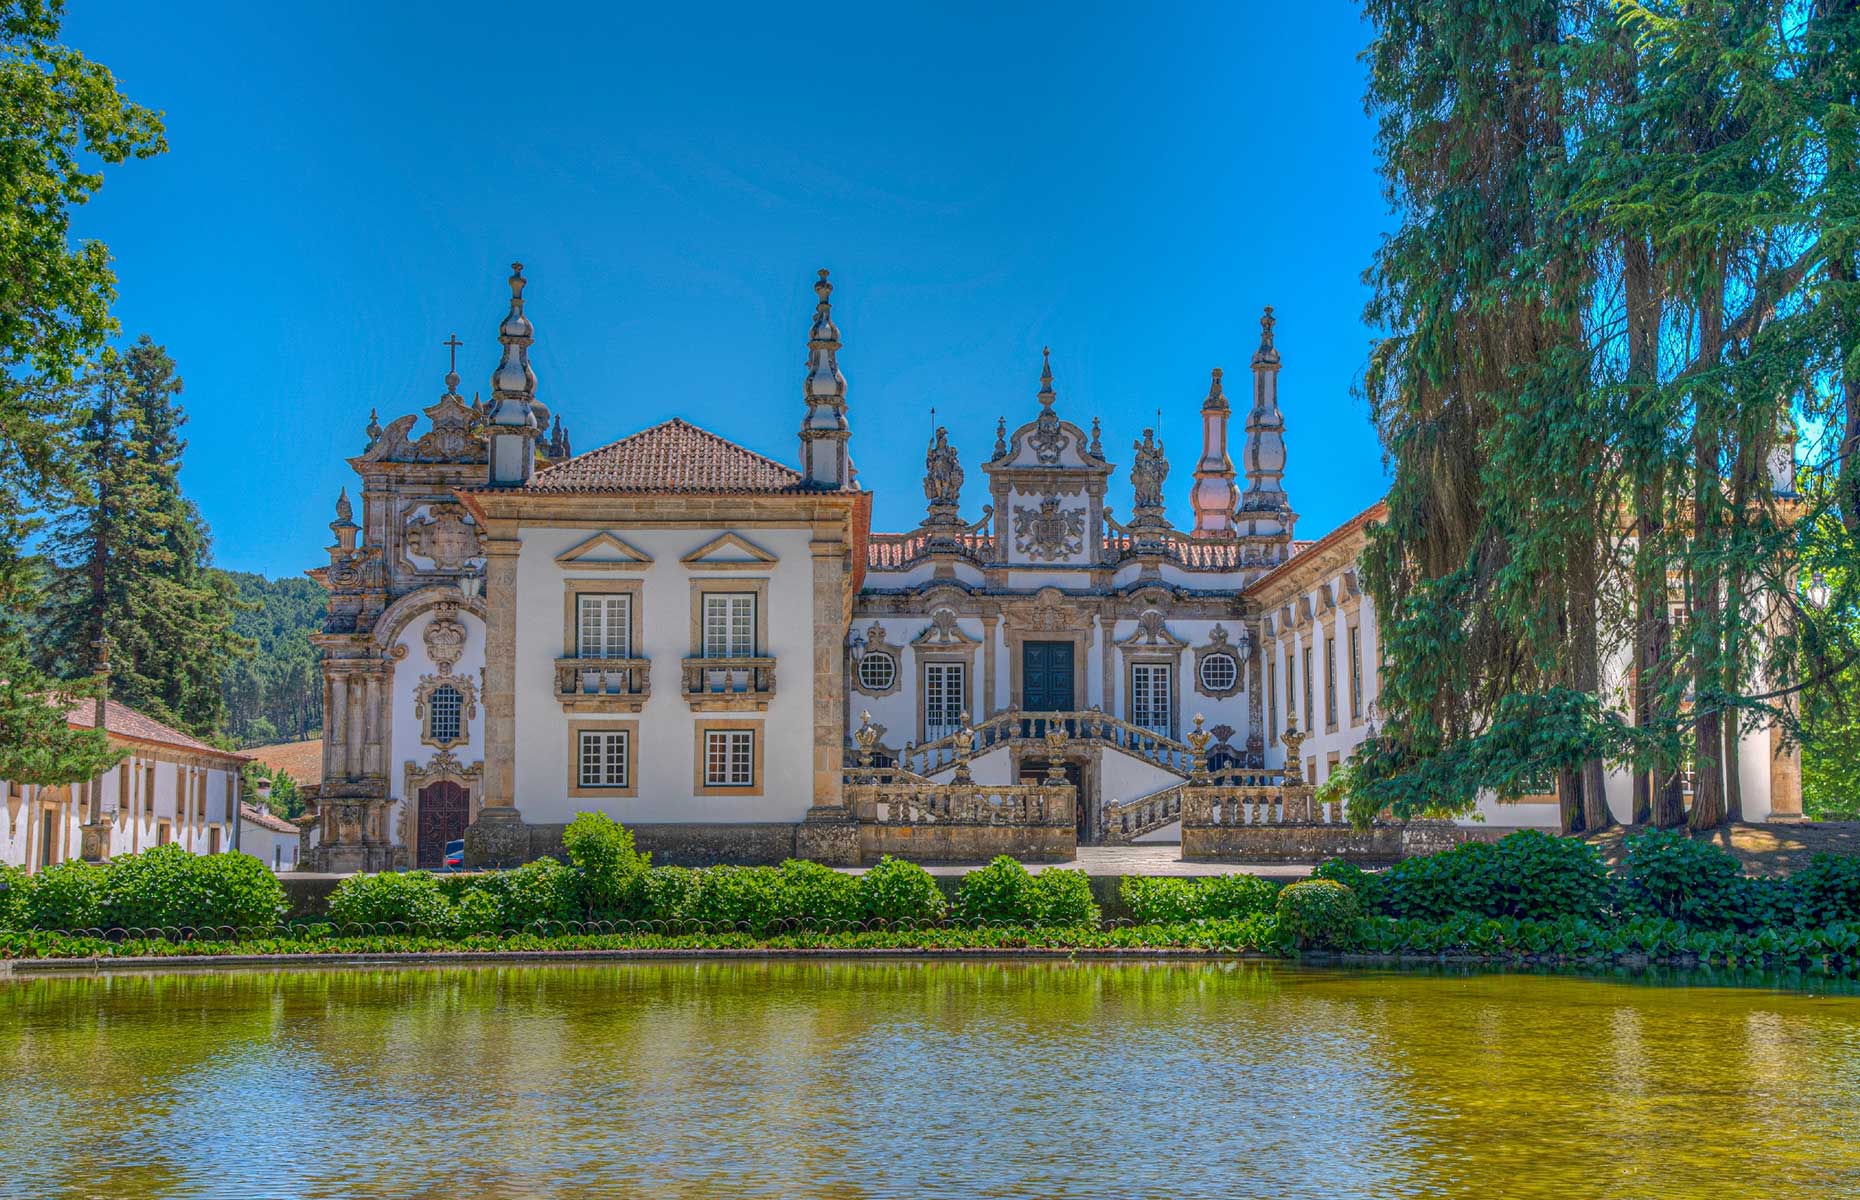 Mateus Palace is one of the excursions on a river cruise along the Douro (Image: trabantos/Shutterstock)